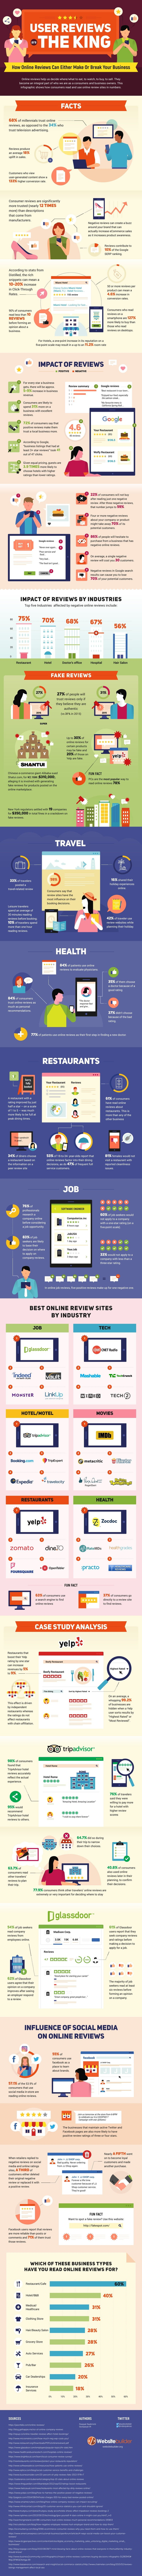 inforgraphic online reviews